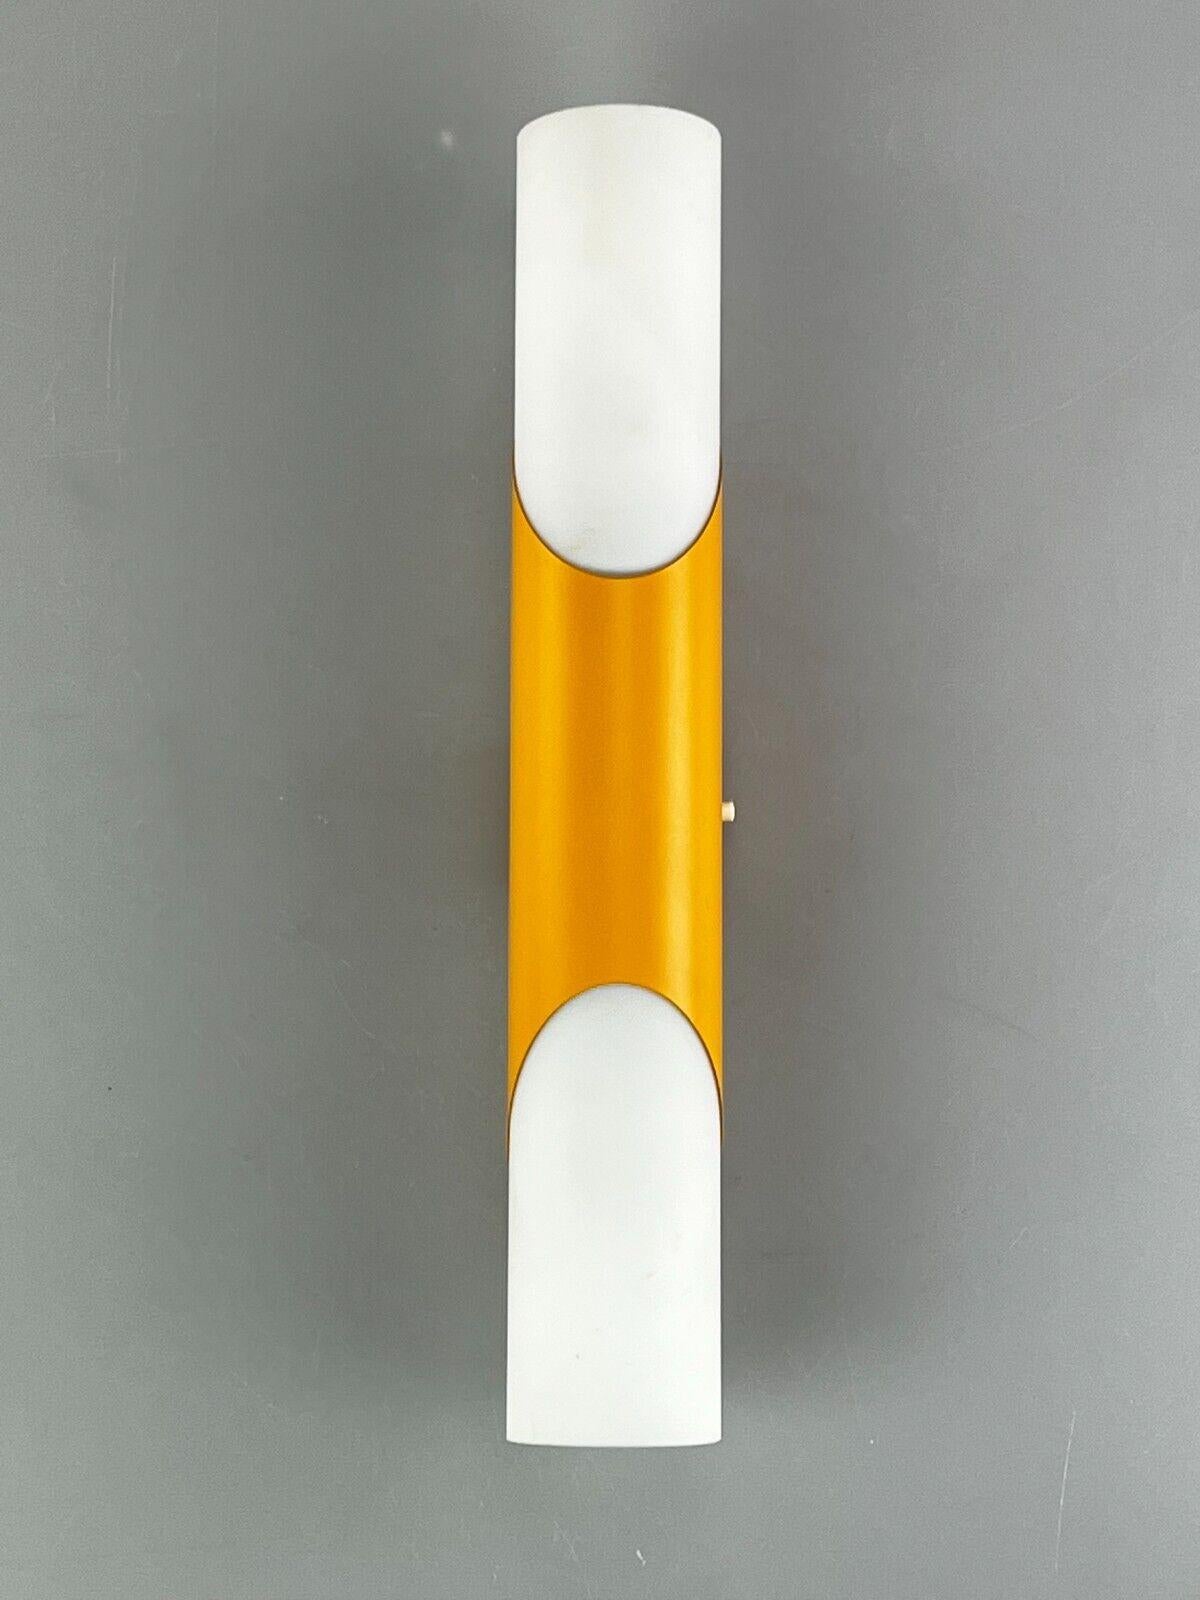 60s 70s Paul Neuhaus wall lamp wall scone brass orange 60s

Object: wall lamp

Manufacturer: Paul Neuhaus

Condition: good

Age: around 1960-1970

Dimensions:

36.5cm x 6cm x 8cm

Other notes:

The pictures serve as part of the